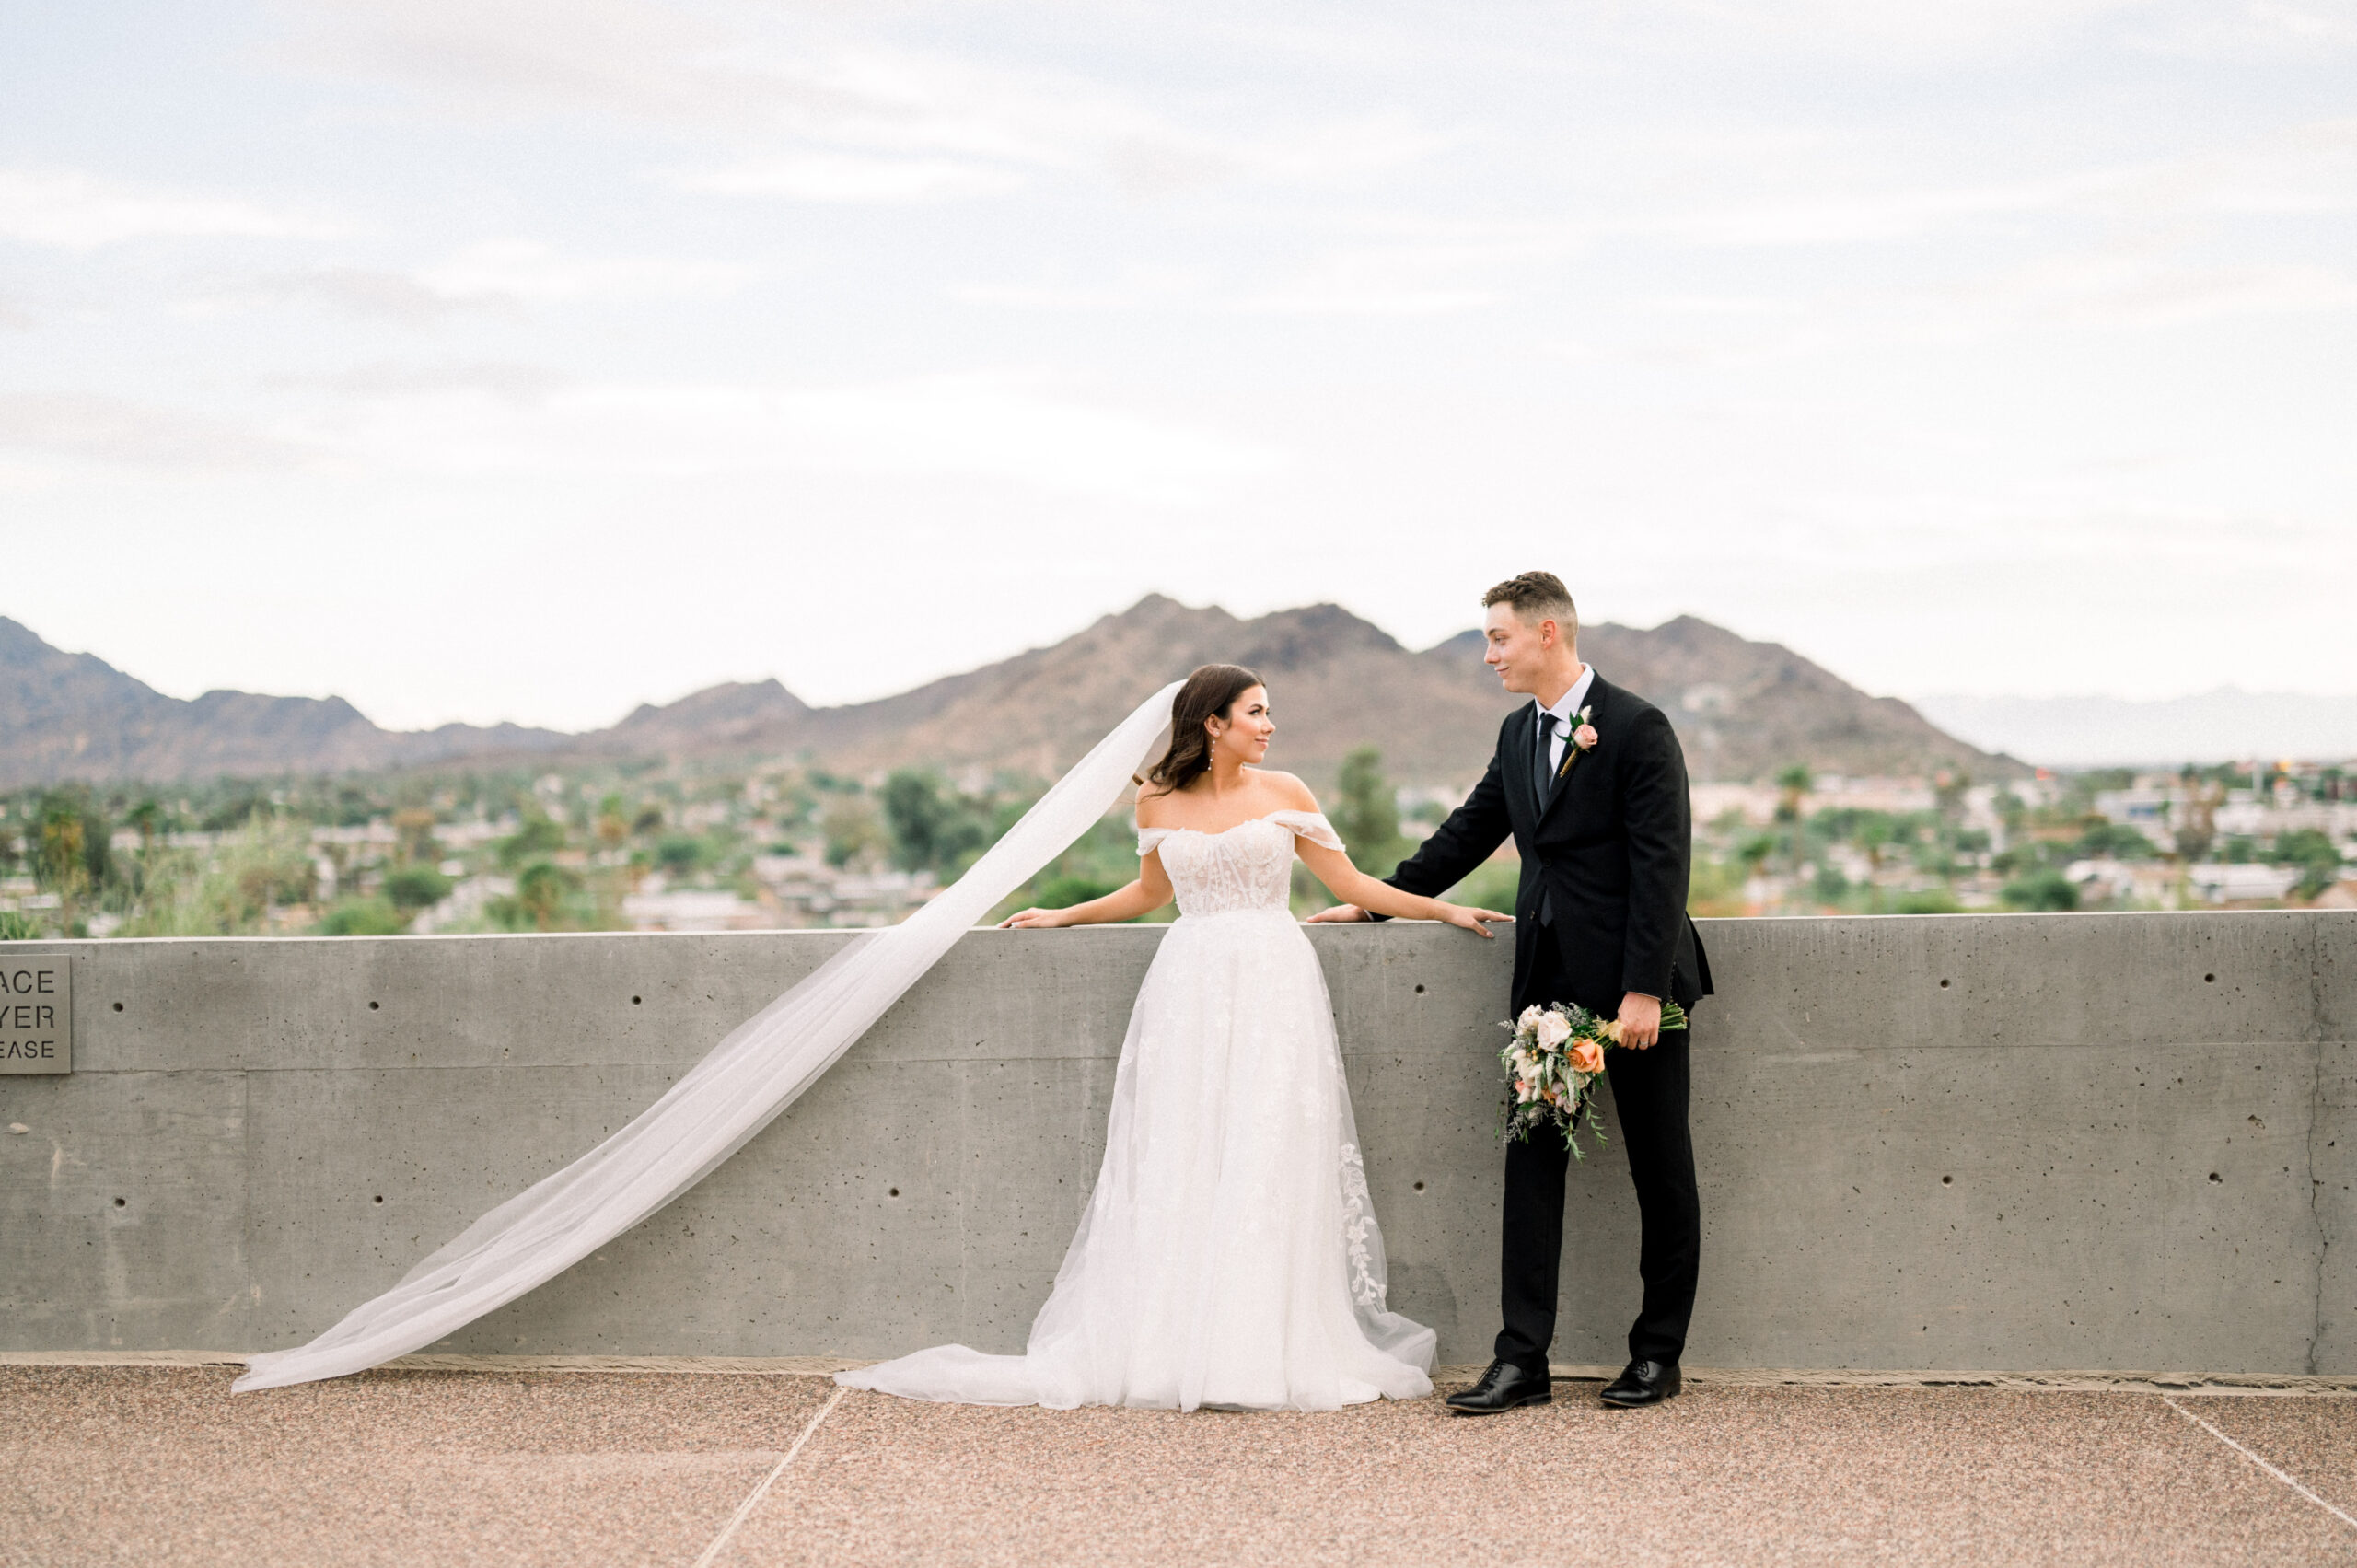 Kennedy and Jared got married at their home church at Dream City Church, which was perfect for their cloudy Phoenix hilltop wedding!